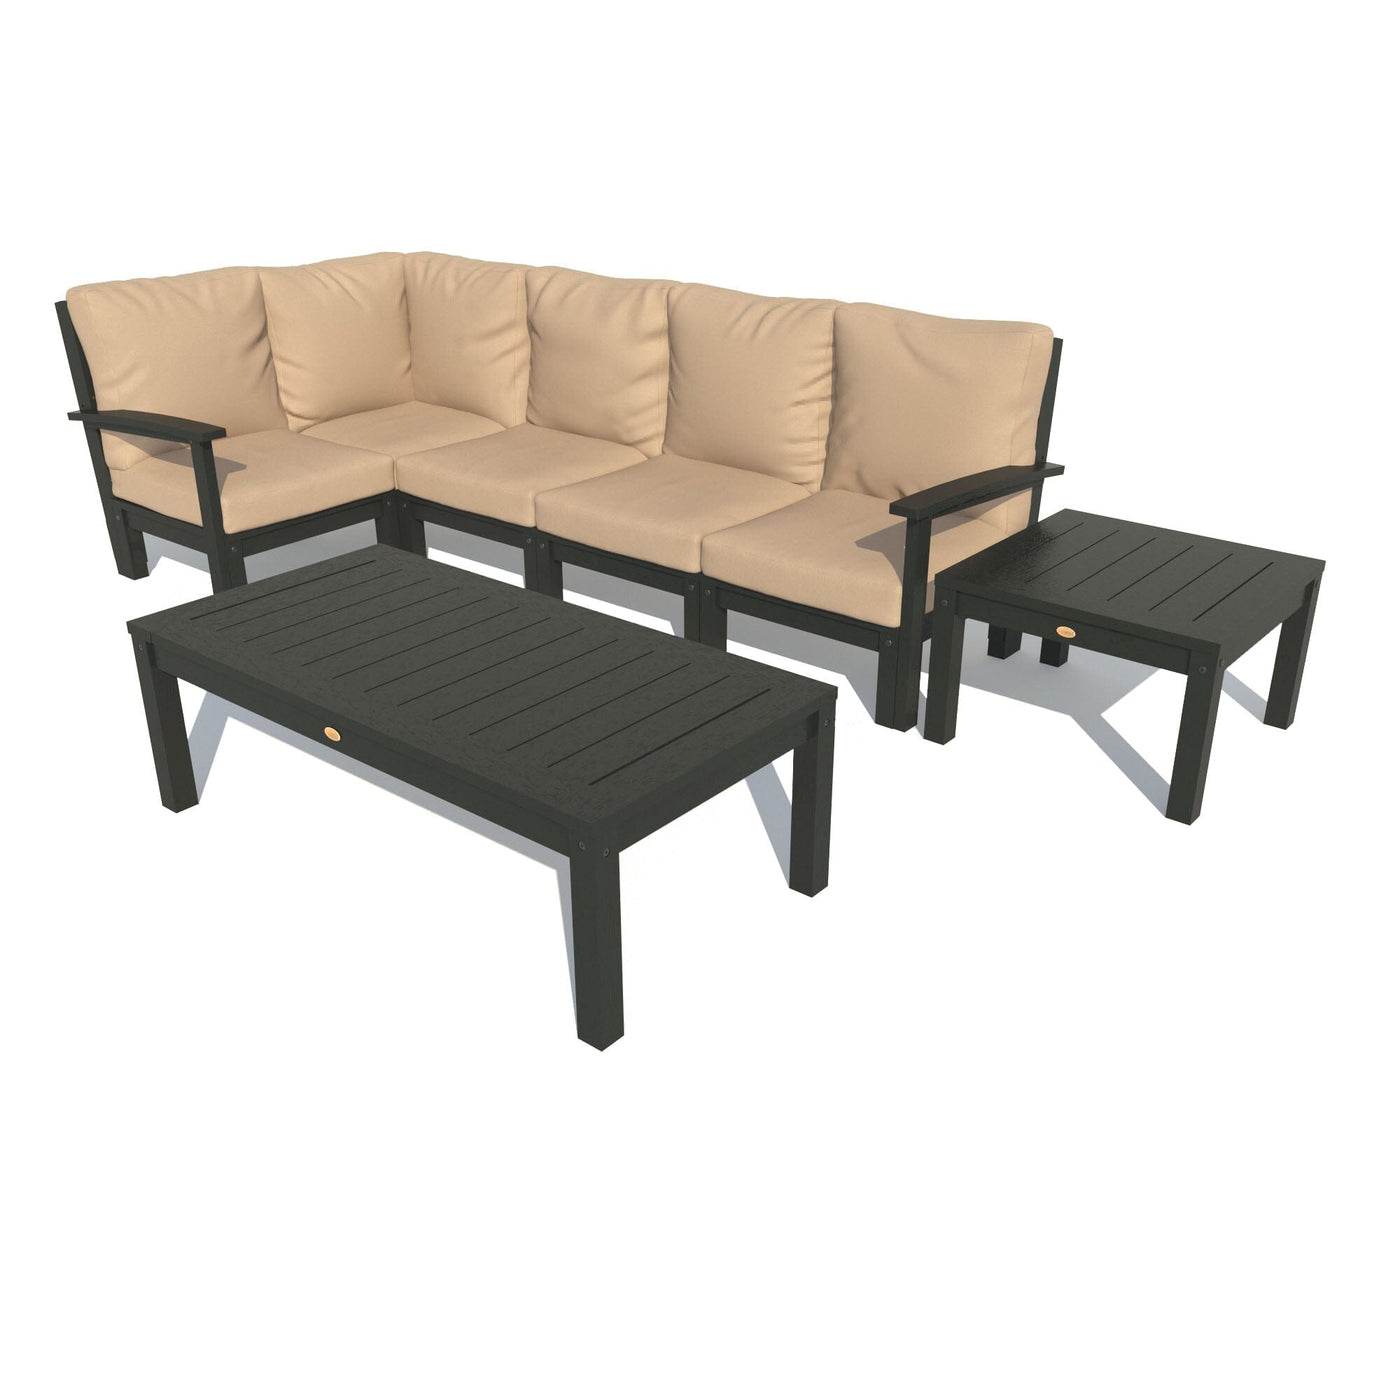 Bespoke Deep Seating: 7 Piece Sectional Set with Conversation and Side Table Deep Seating Highwood USA Dune Black 